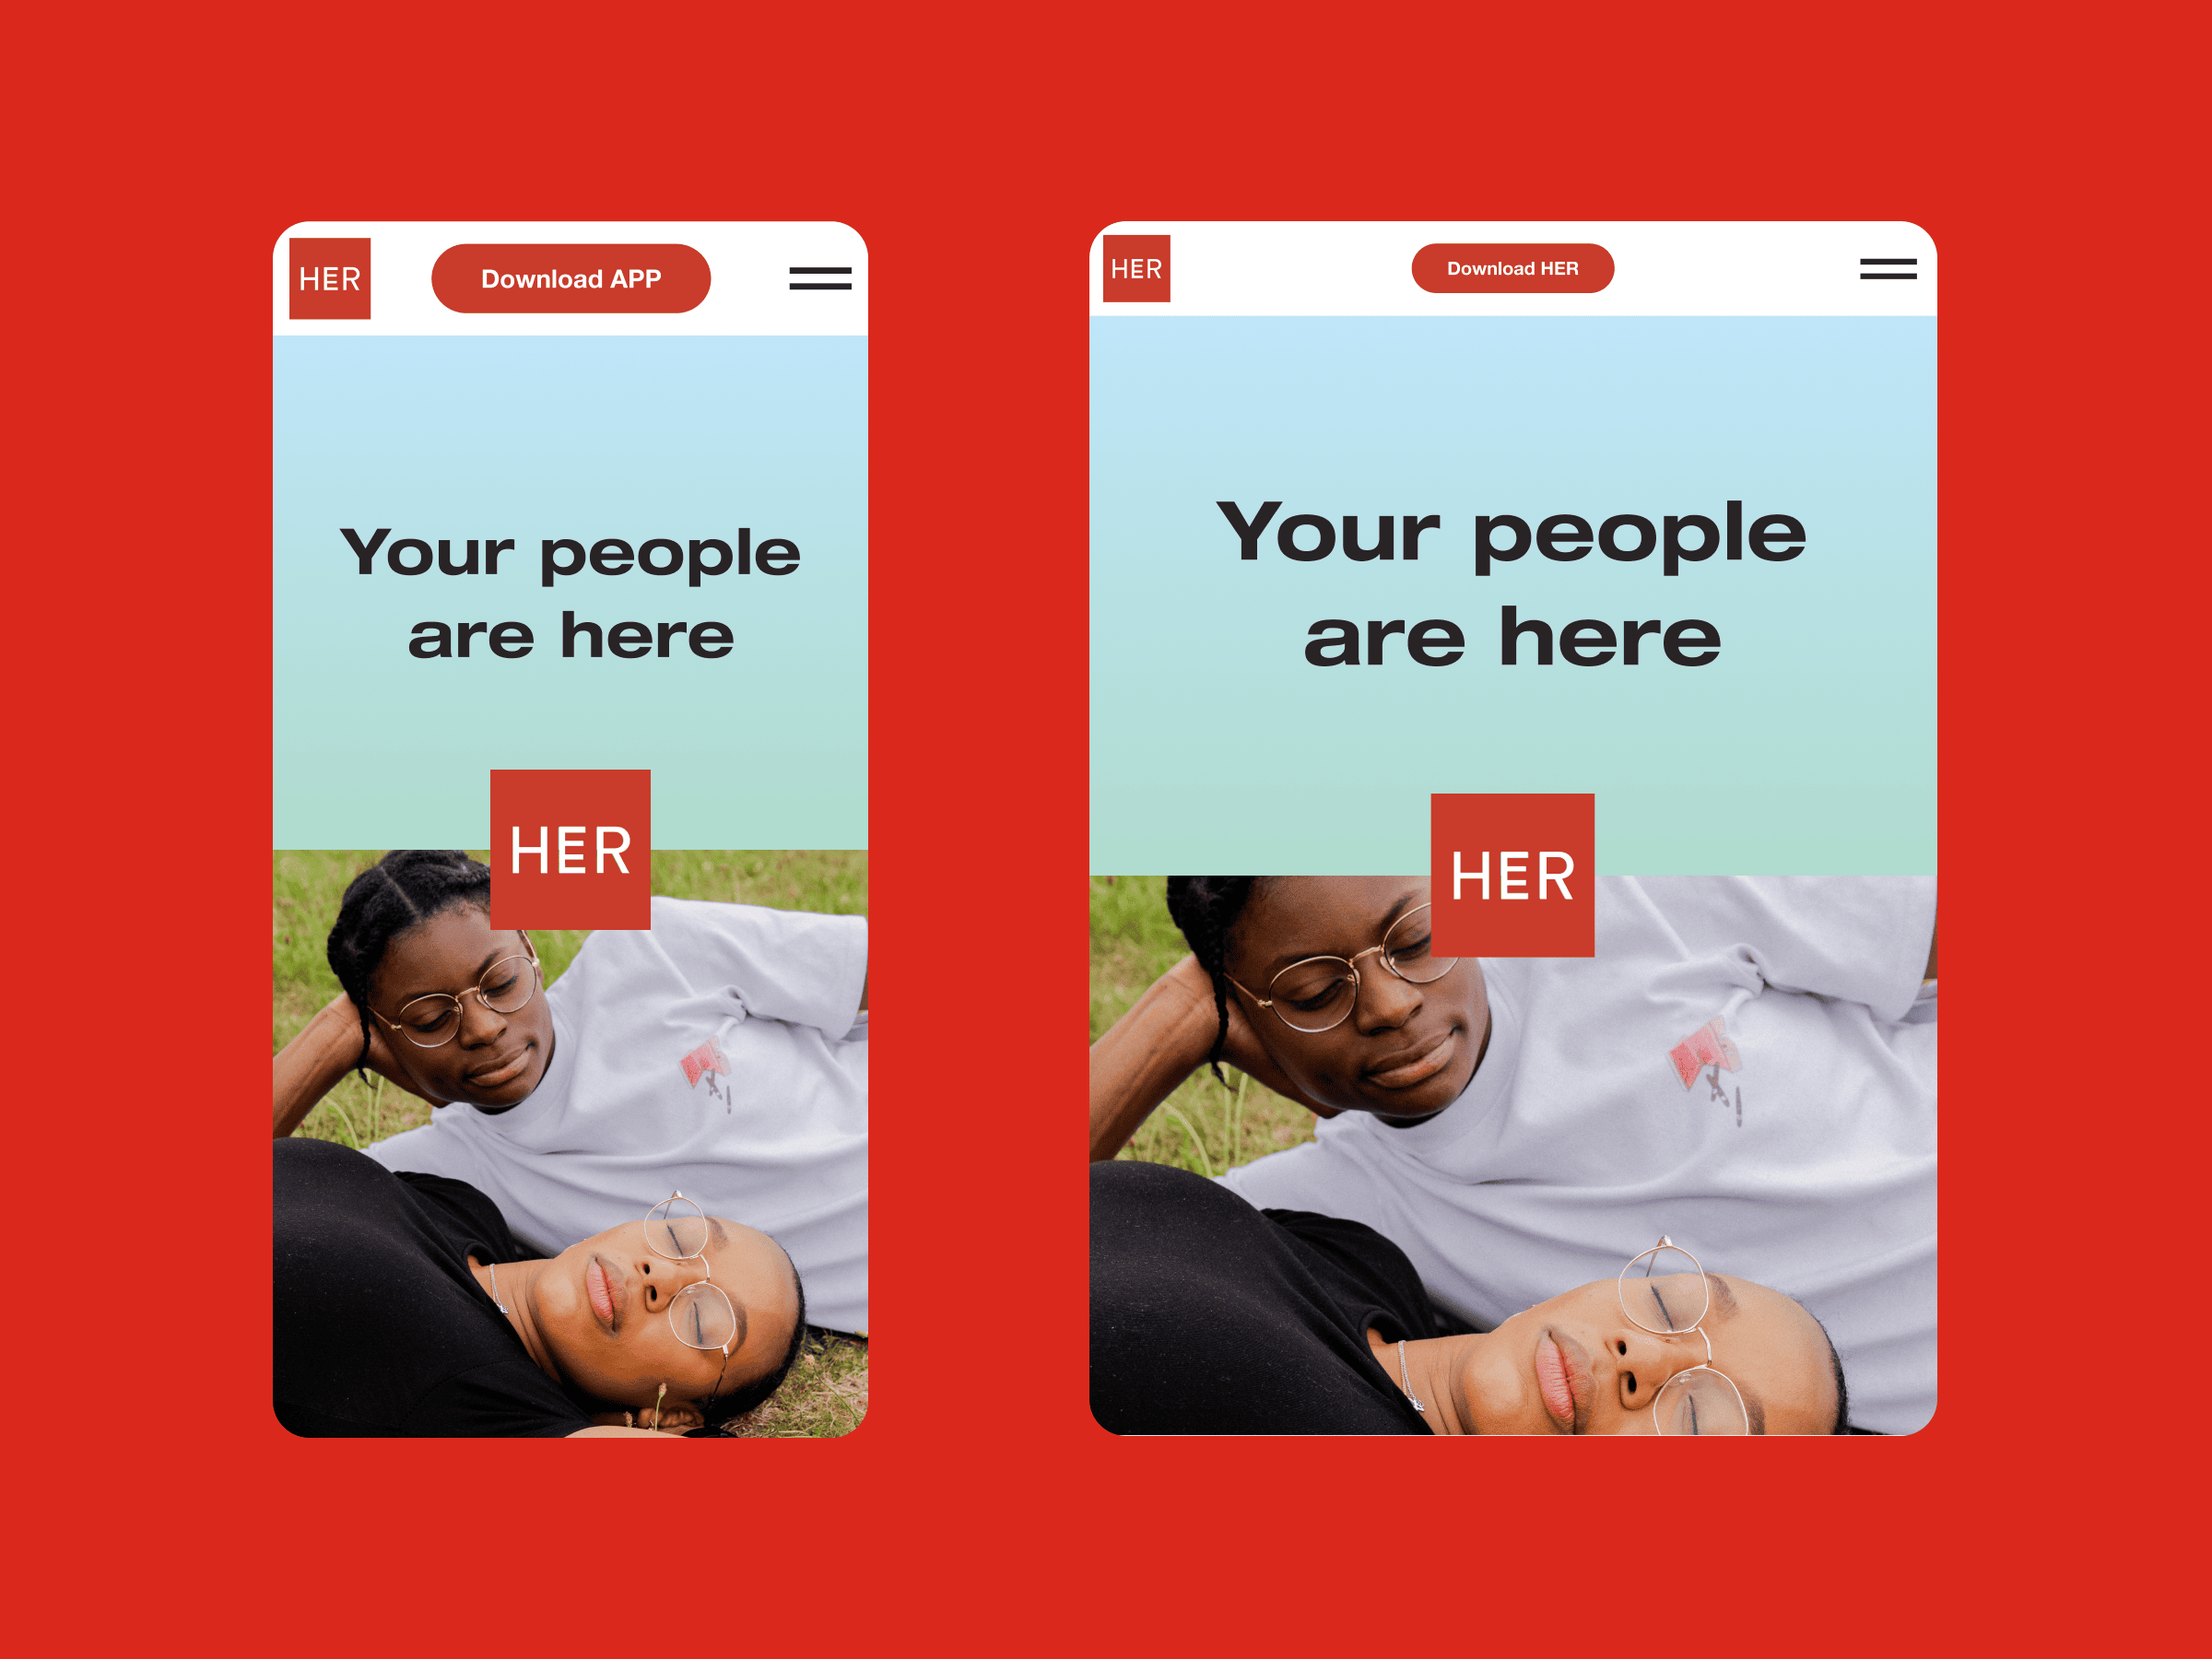 Hero section of the homepage of HER dating app website on mobile (left) and tablet (right).